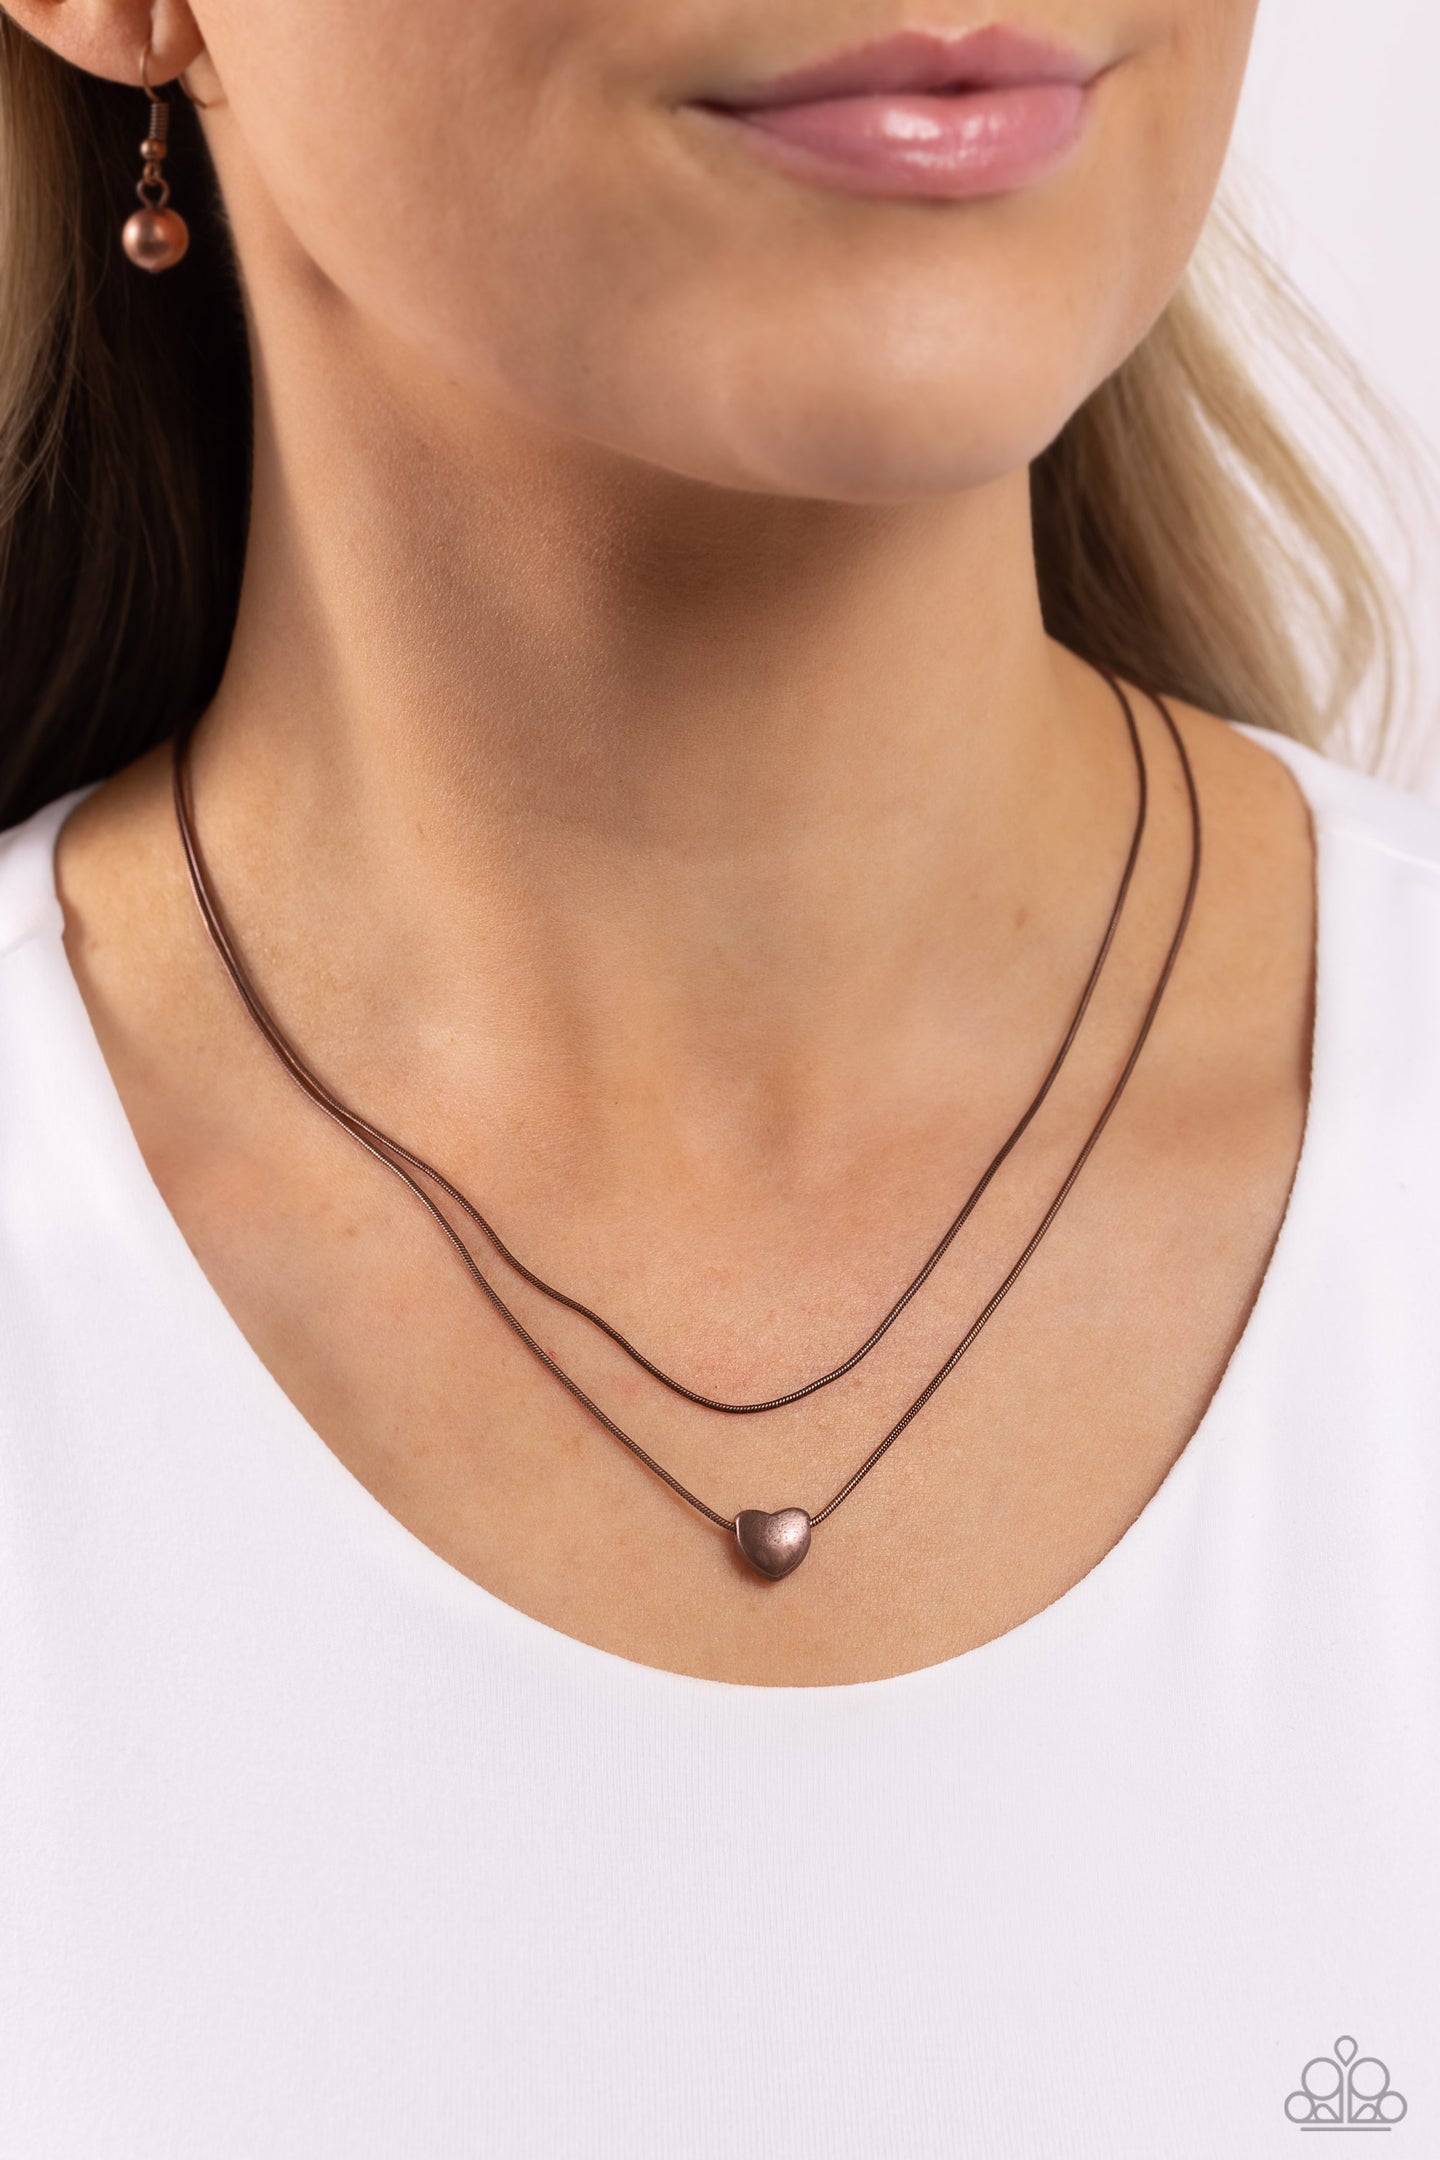 Sweetheart Series - Copper necklace